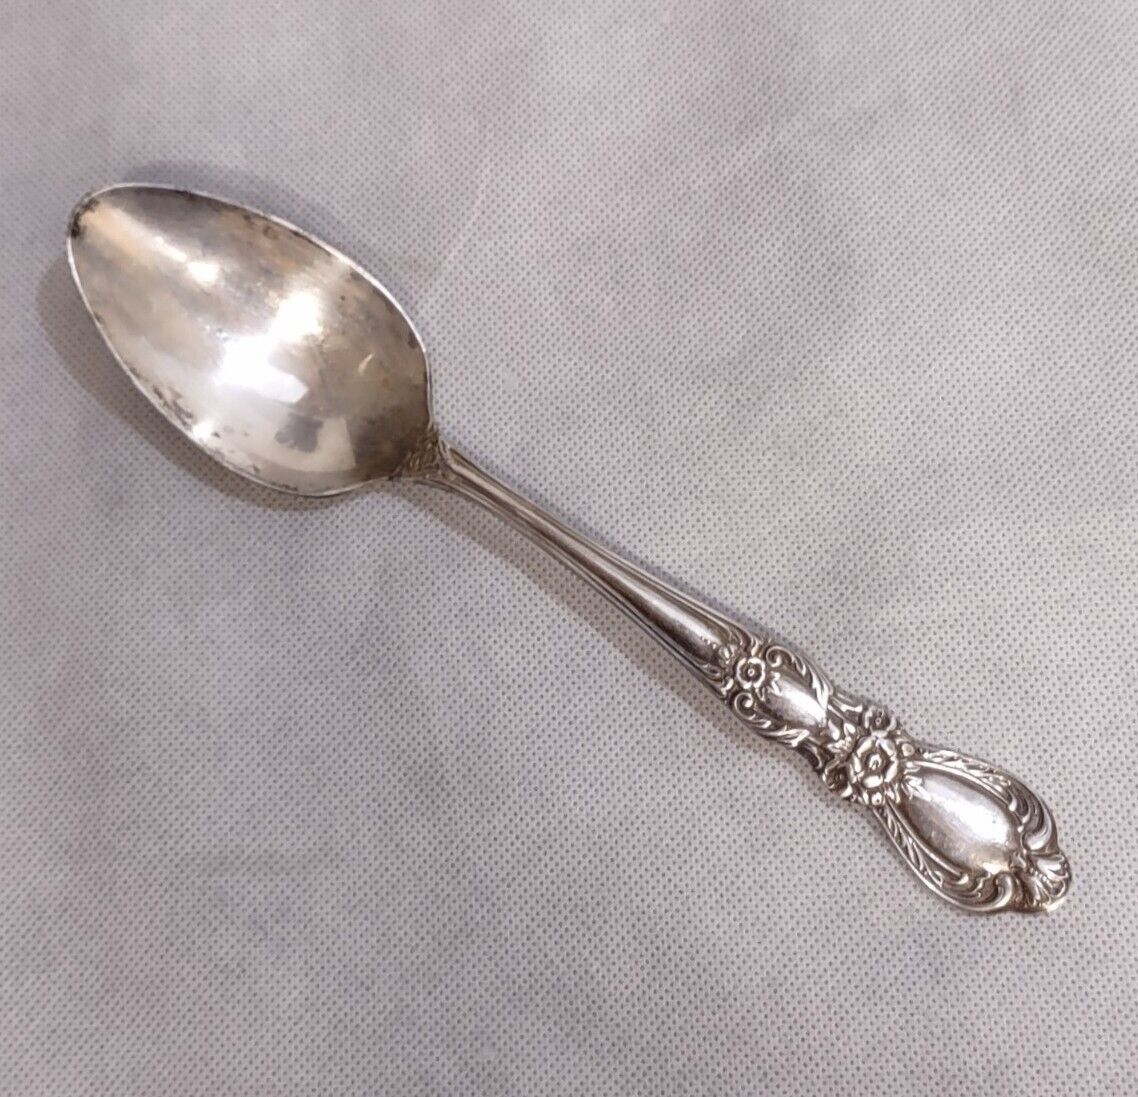 Primary image for Int'l Silver Heritage 1953 Serving Table Spoon Silverplated 8.5" 1847 Rogers